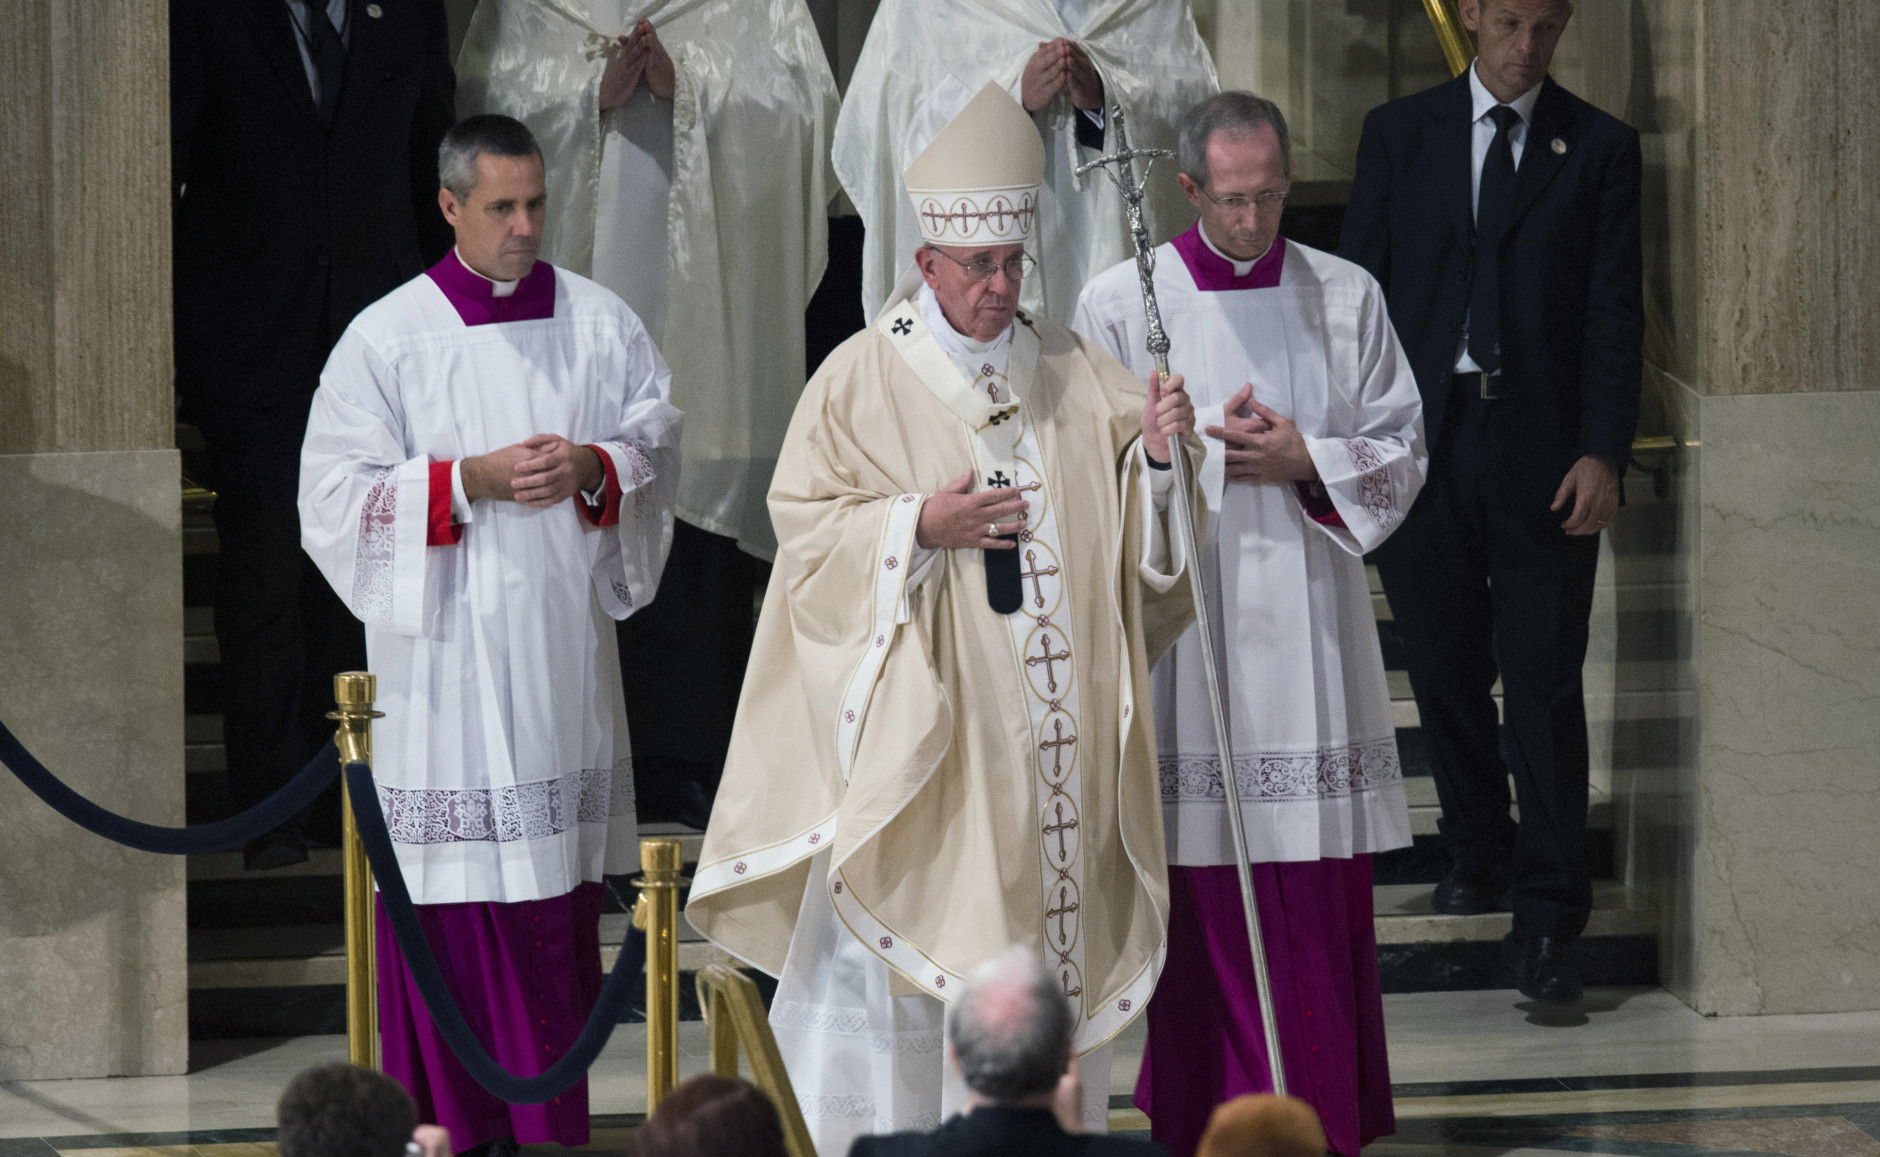 WASHINGTON, DC - SEPTEMBER 23:  Pope Francis arrives for the canonization Mass for Junipero Serra at the Basilica of the National Shrine of the Immaculate Conception on September 23, 2015 in Washington, DC. Junipero Serra was an 18th century Spanish Franciscan friar who founded a mission in Baja, California to bring Christianity to the indigenous population. This is the first-ever canonization by a Pope on U.S. soil. Pope Francis is on a multi-city tour on his first visit to the U.S. as Pope. (Photo by Andrew caballero-Reynolds/Getty Images)